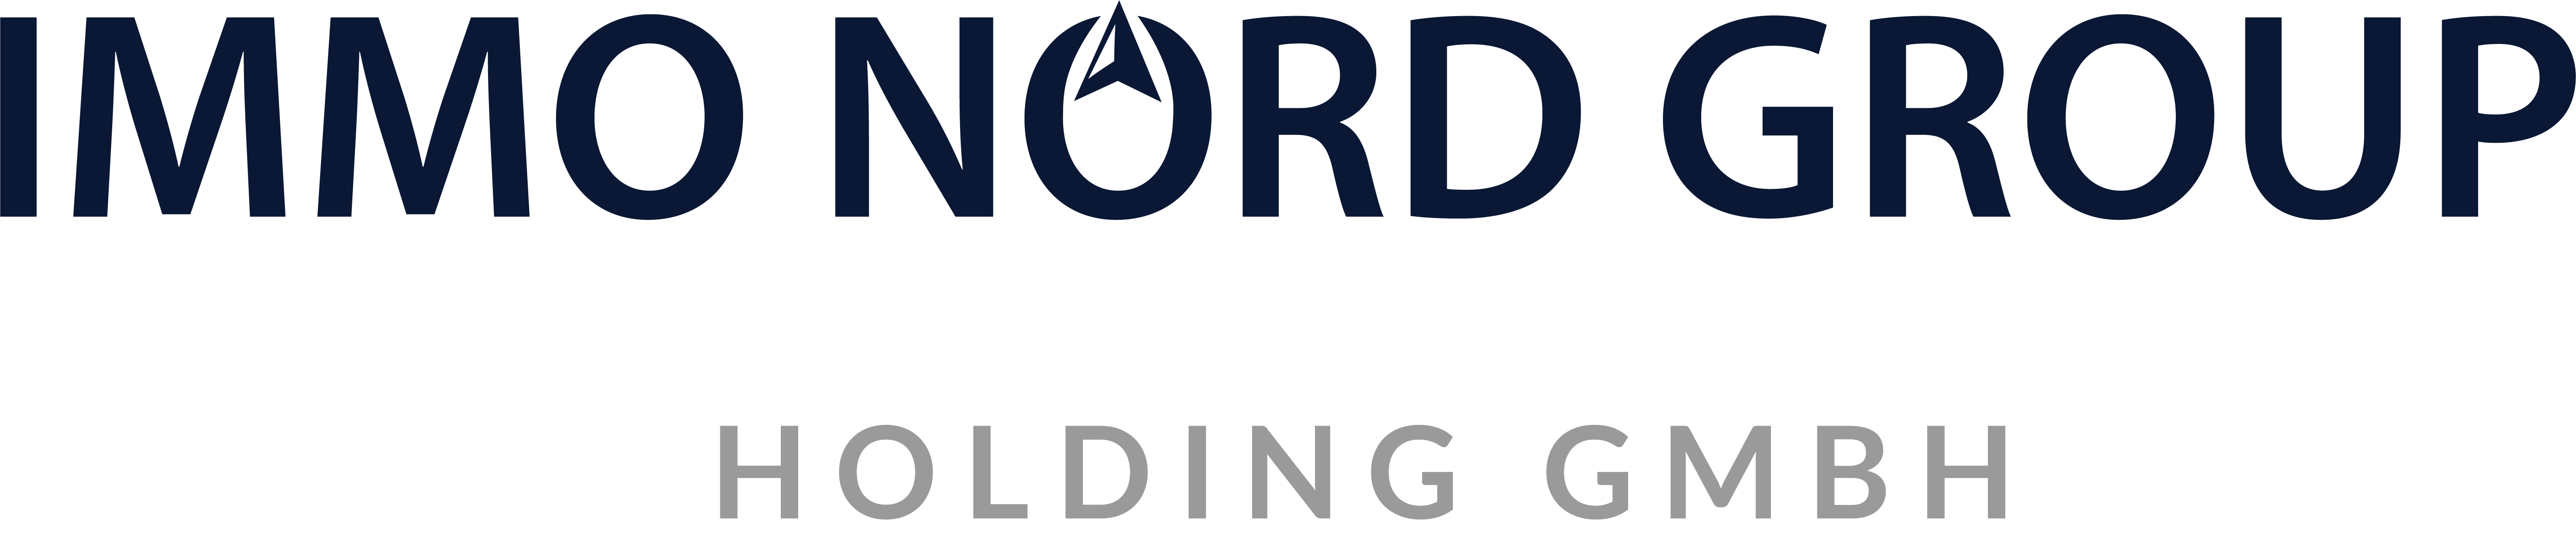 Immo Nord Group Holding GmbH